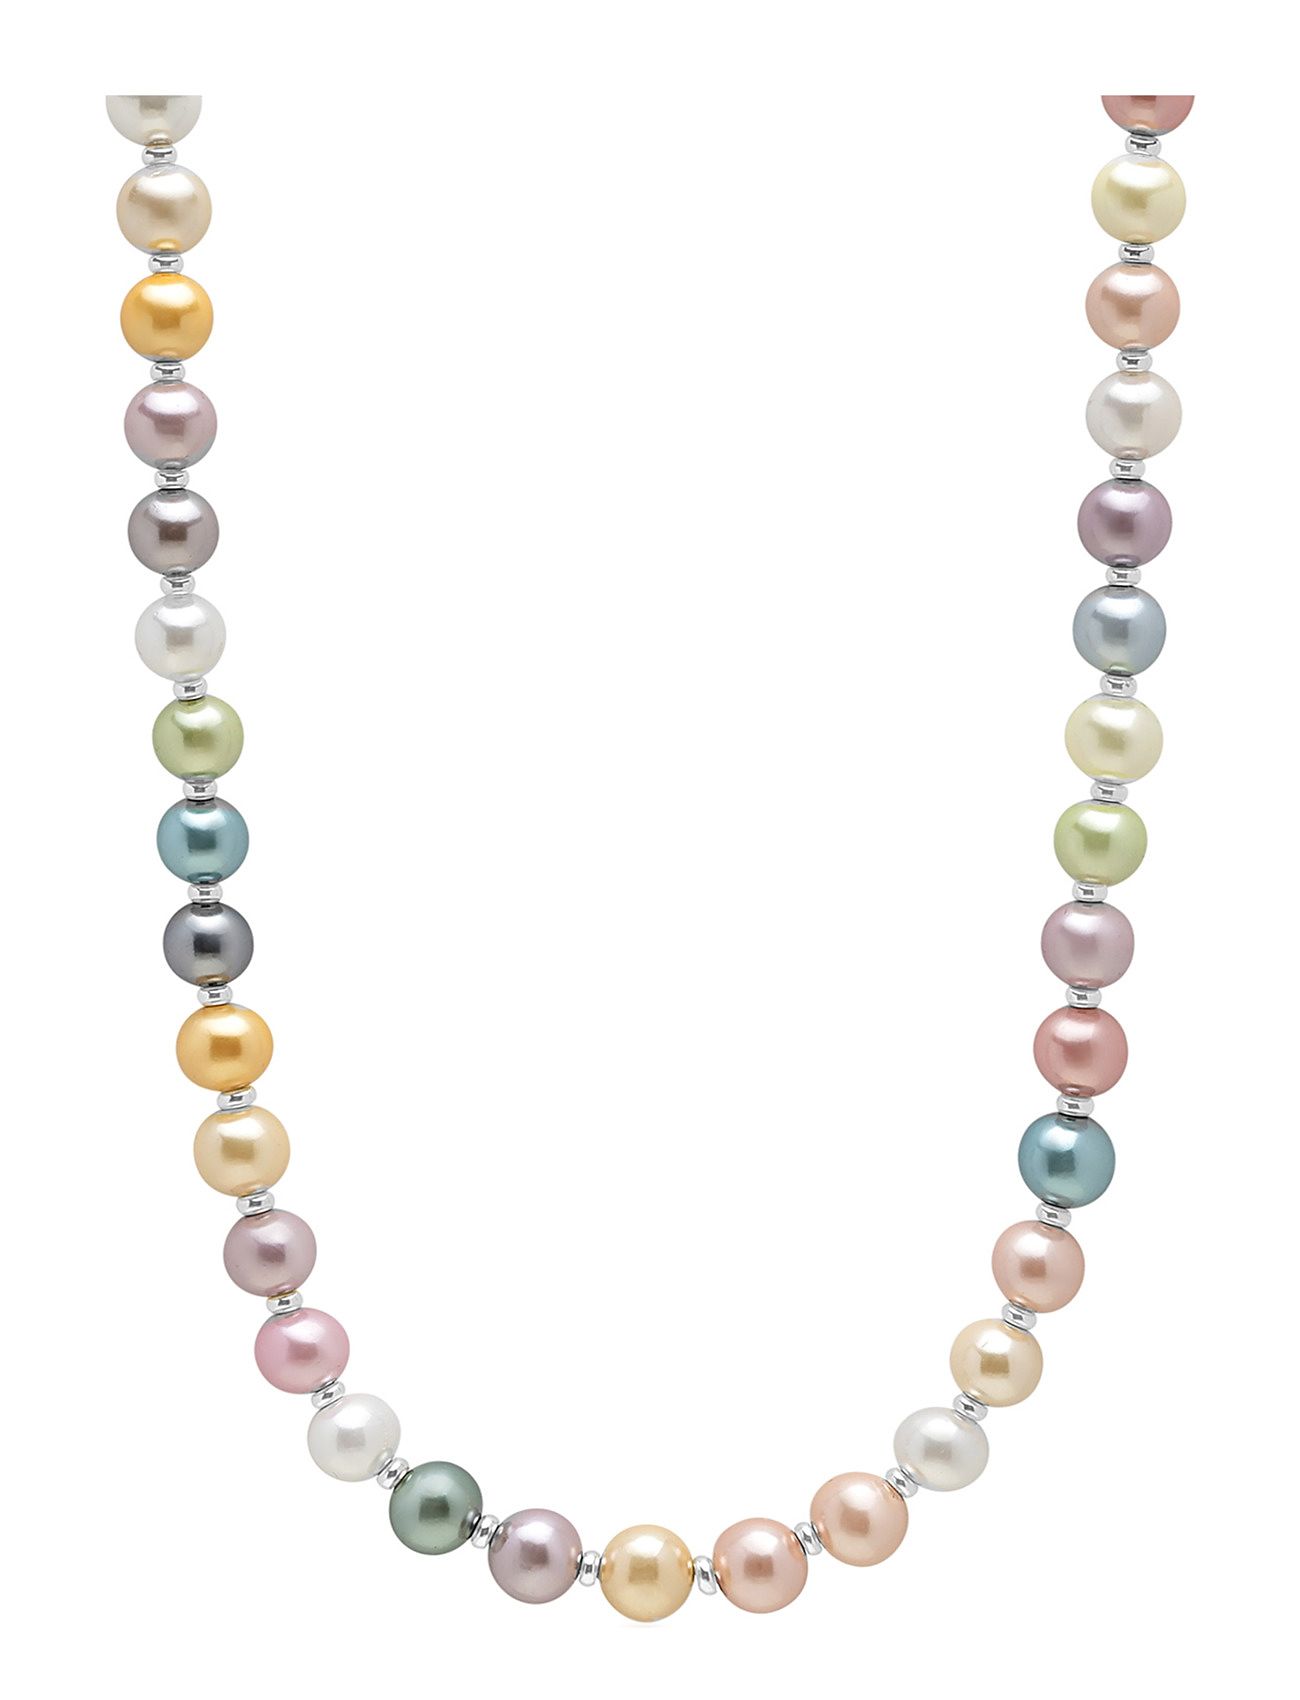 Pastel Pearl Necklace With Silver Halsband Smycken Multi/patterned Nialaya